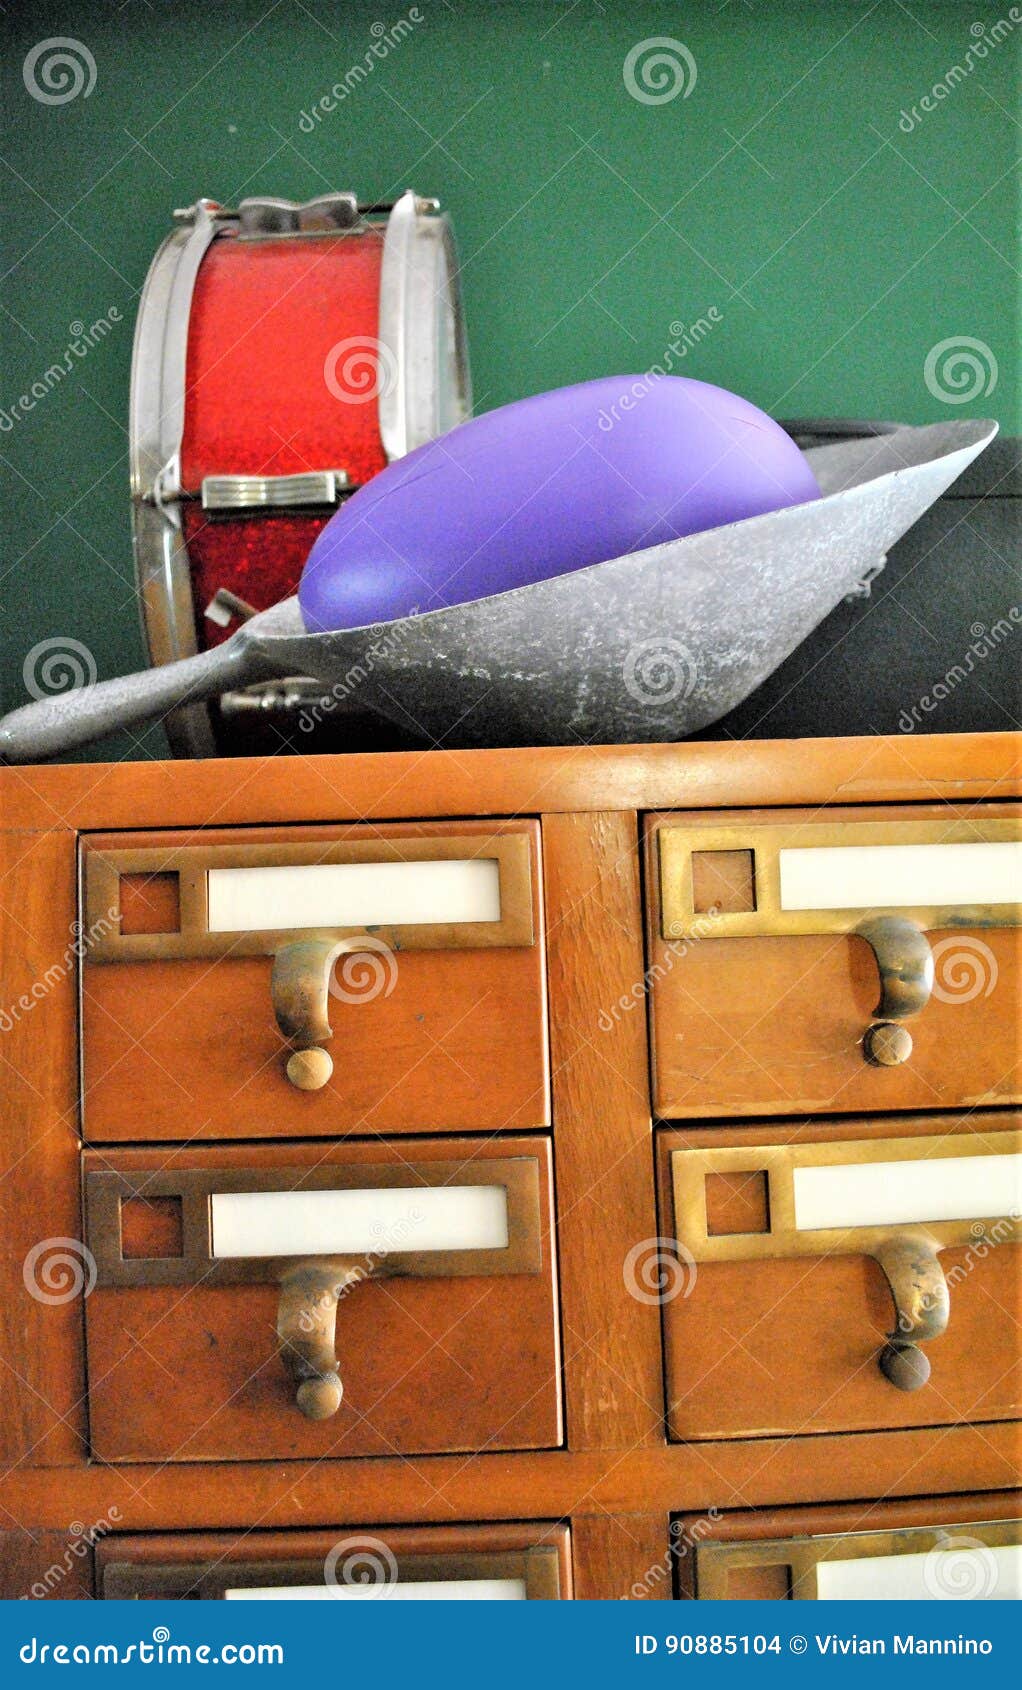 Library card catalog stock photo. Image of antique, card - 90885104